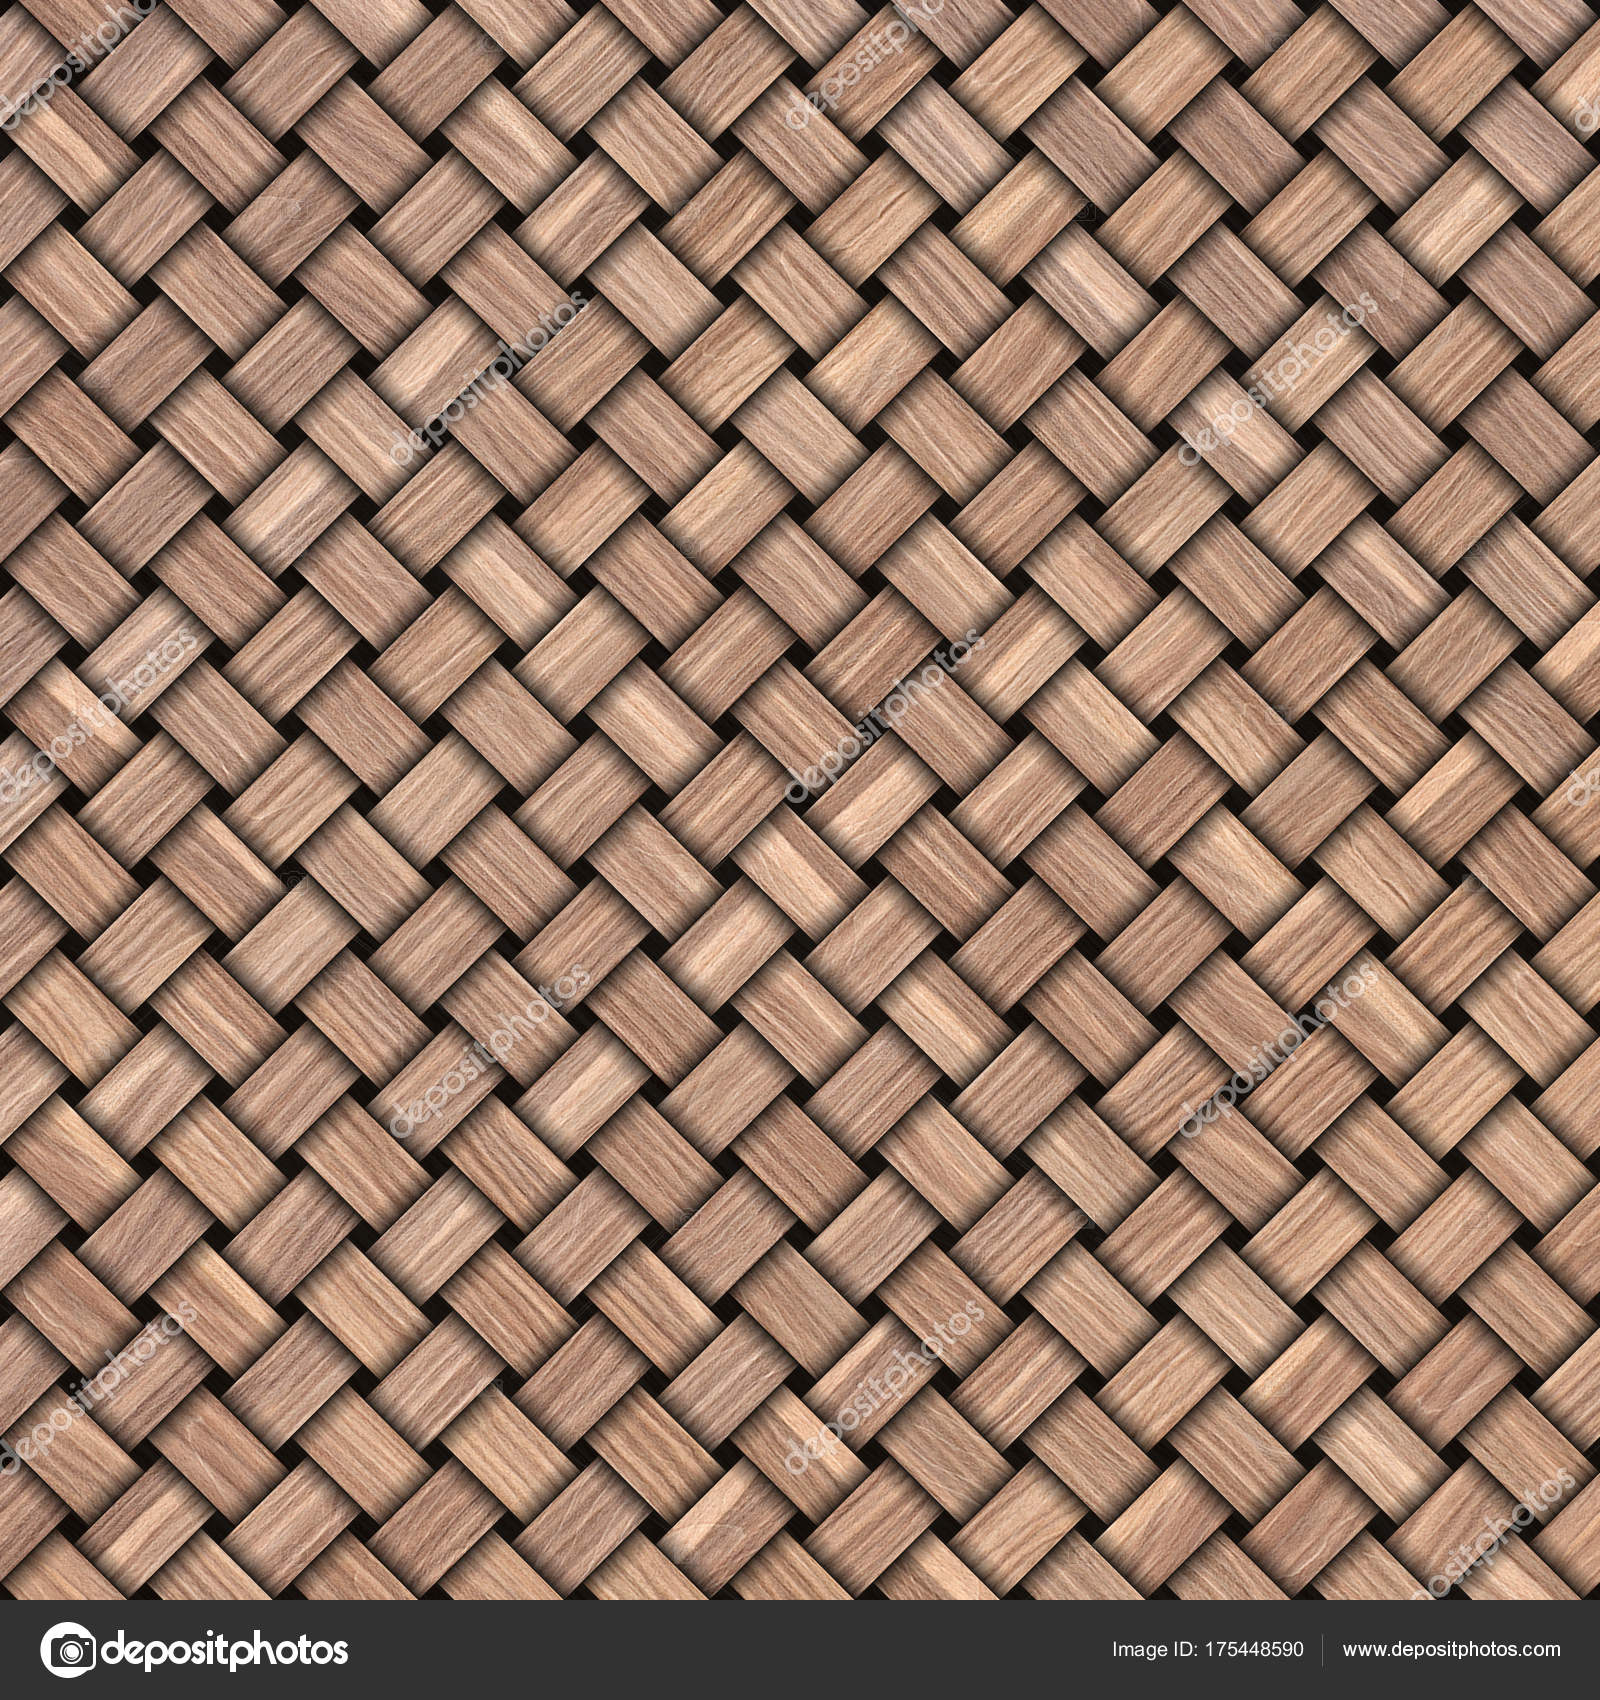 Wooden weave texture background. Abstract decorative wooden textured ...